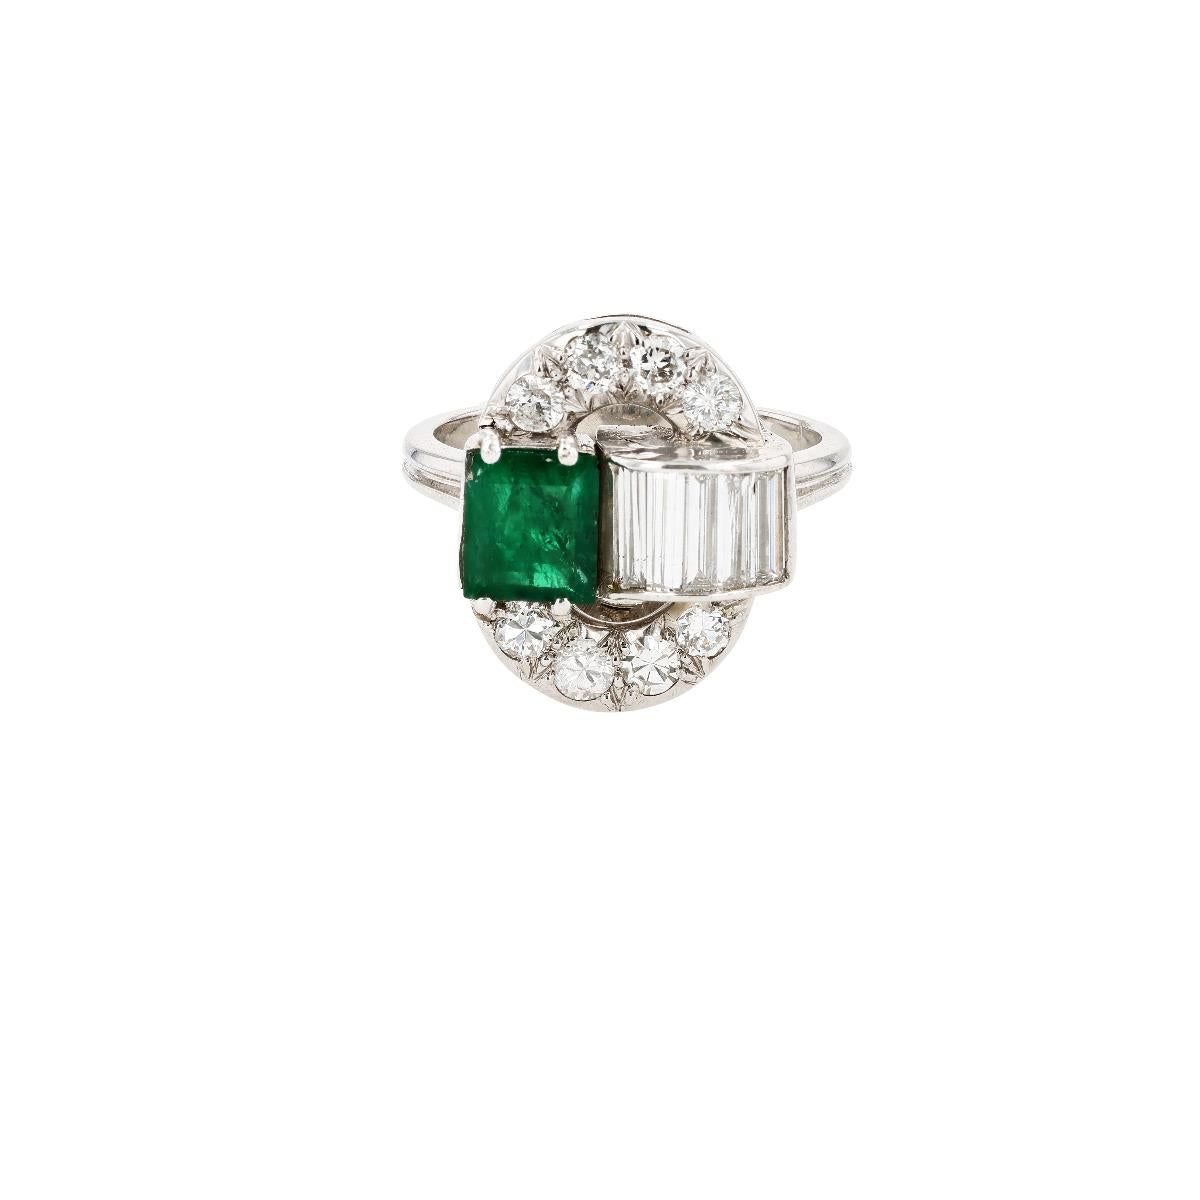 Vintage 14K White Gold Emerald And Diamond Ring